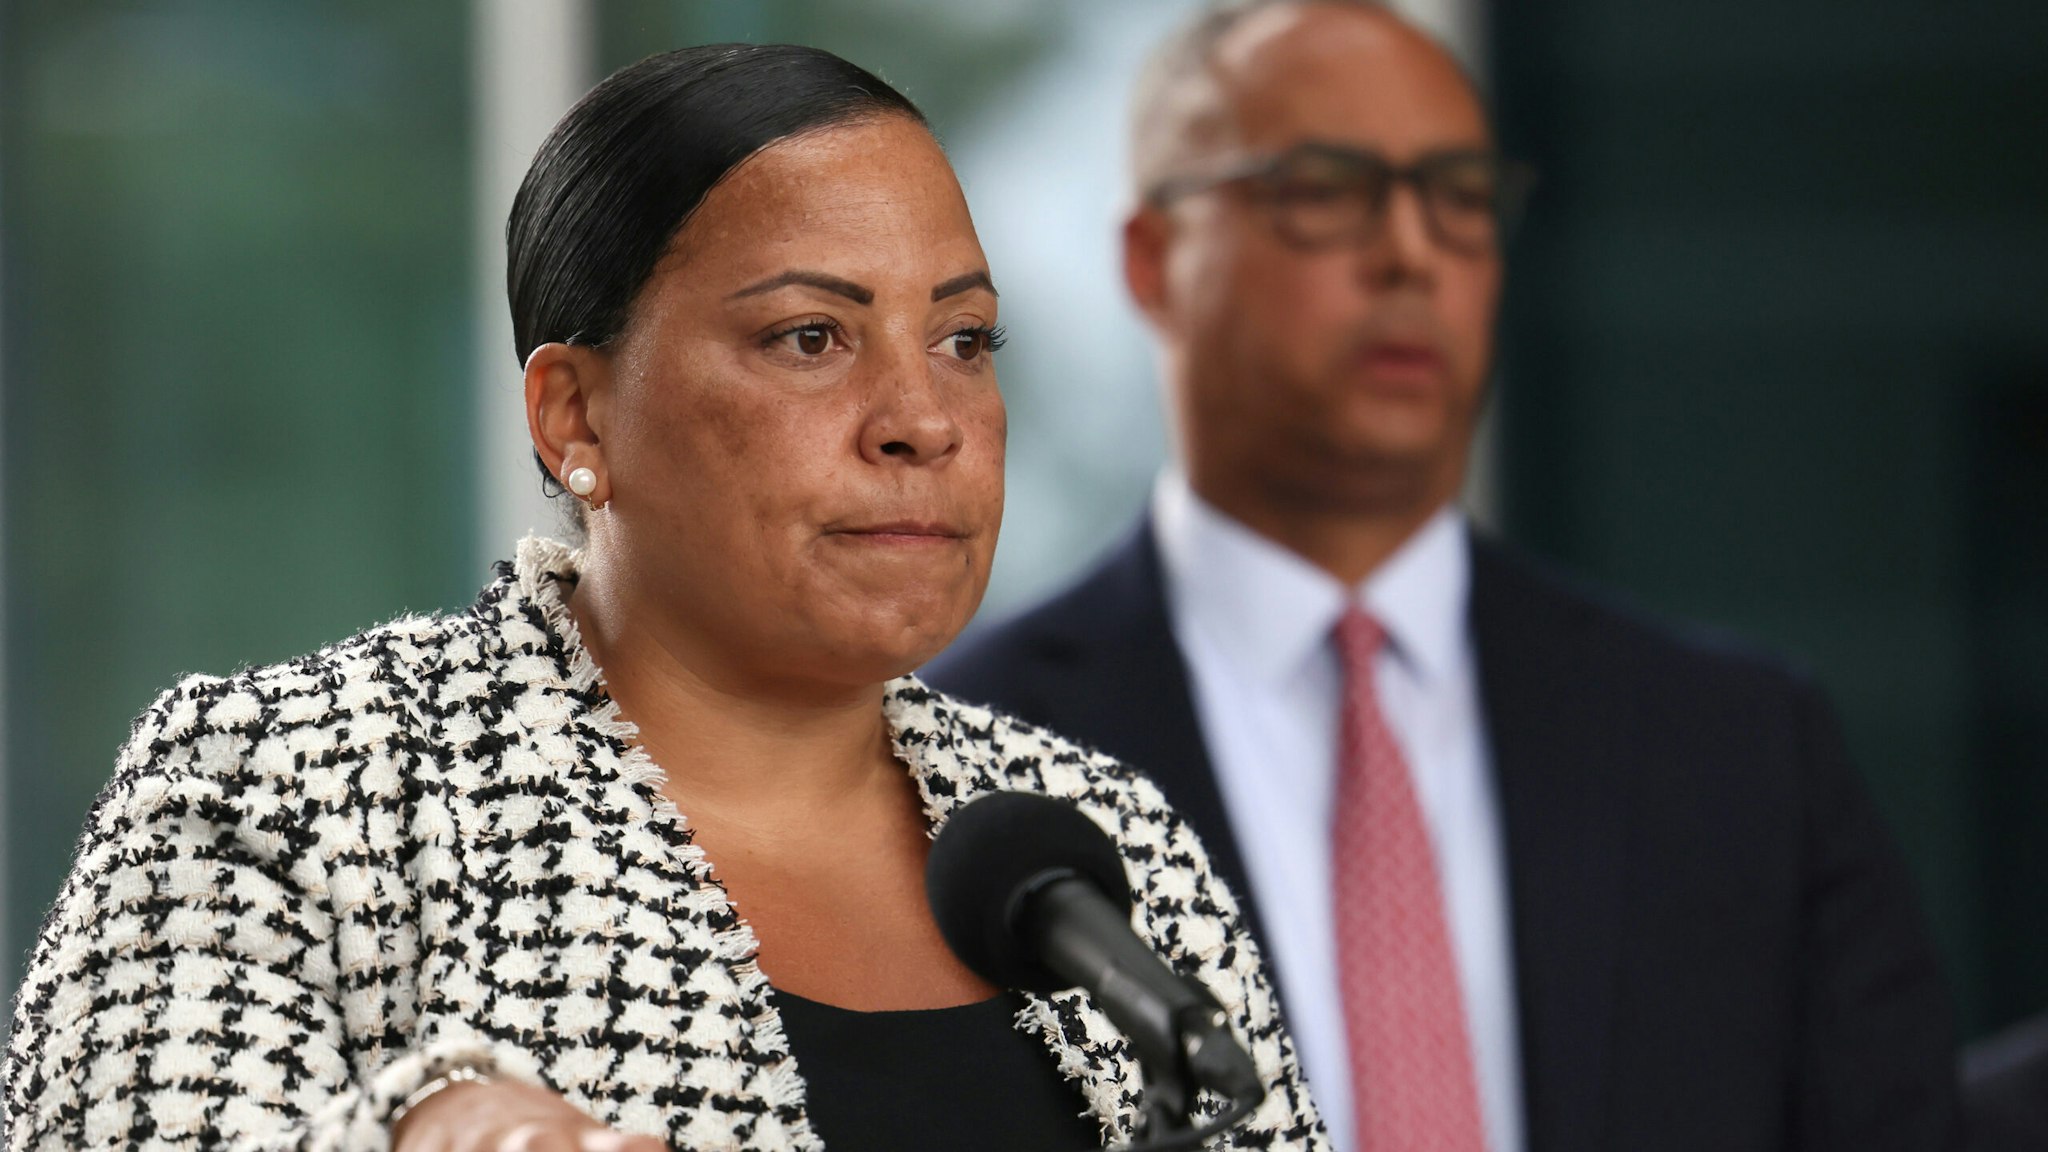 Boston, MA - July 5: U.S. Attorney Rachael Rollins speaks to reporters about the white supremacist activity in the area over the 4th of July weekend during a press conference outside of Boston Police Headquarters.